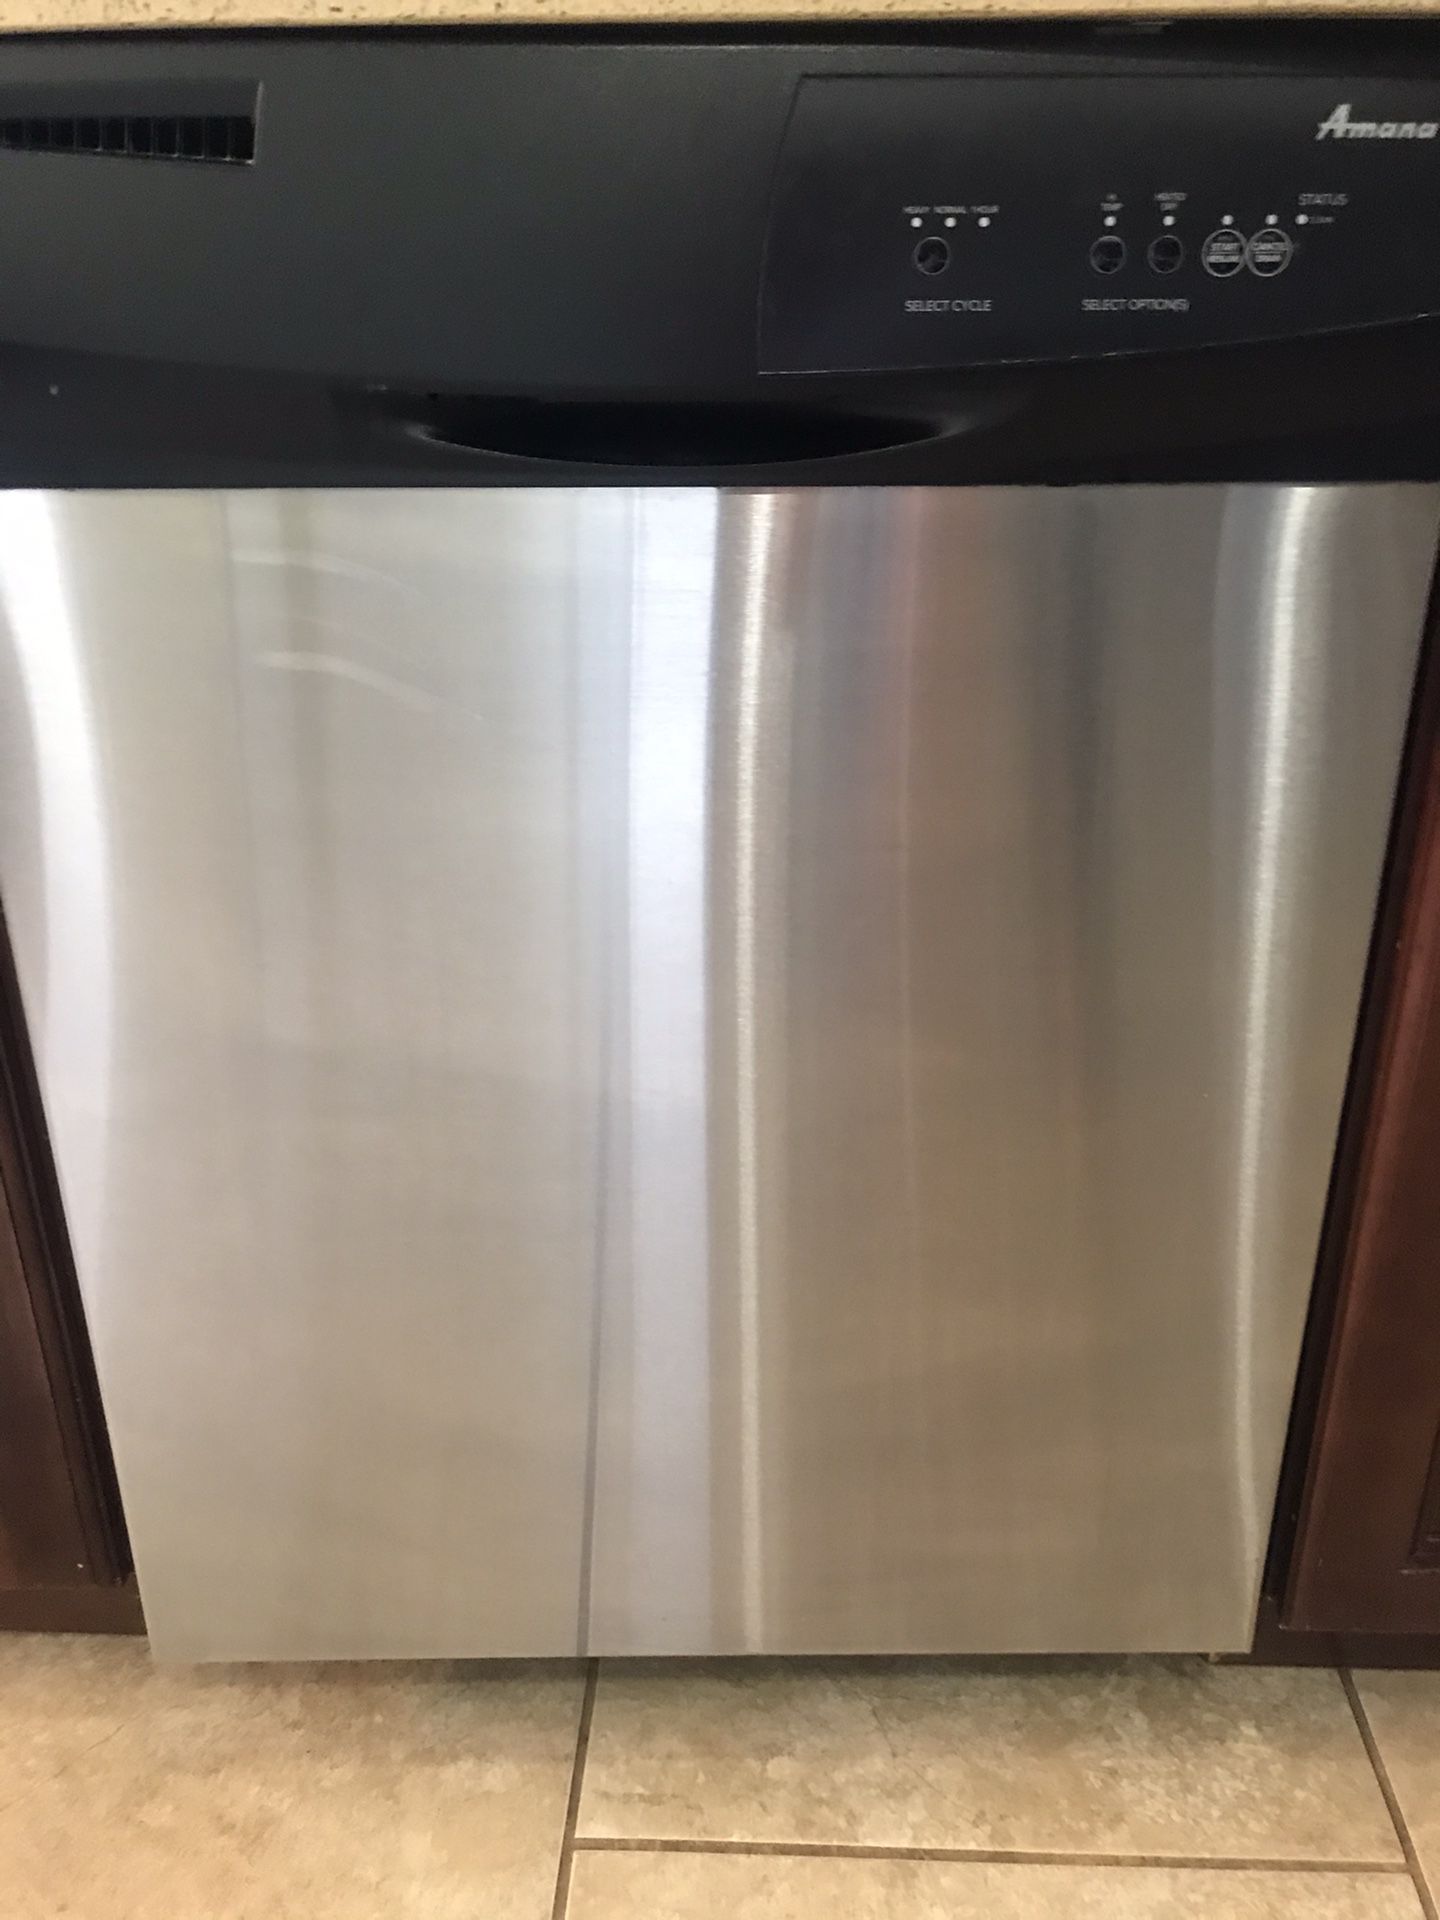 Dishwasher- never been used